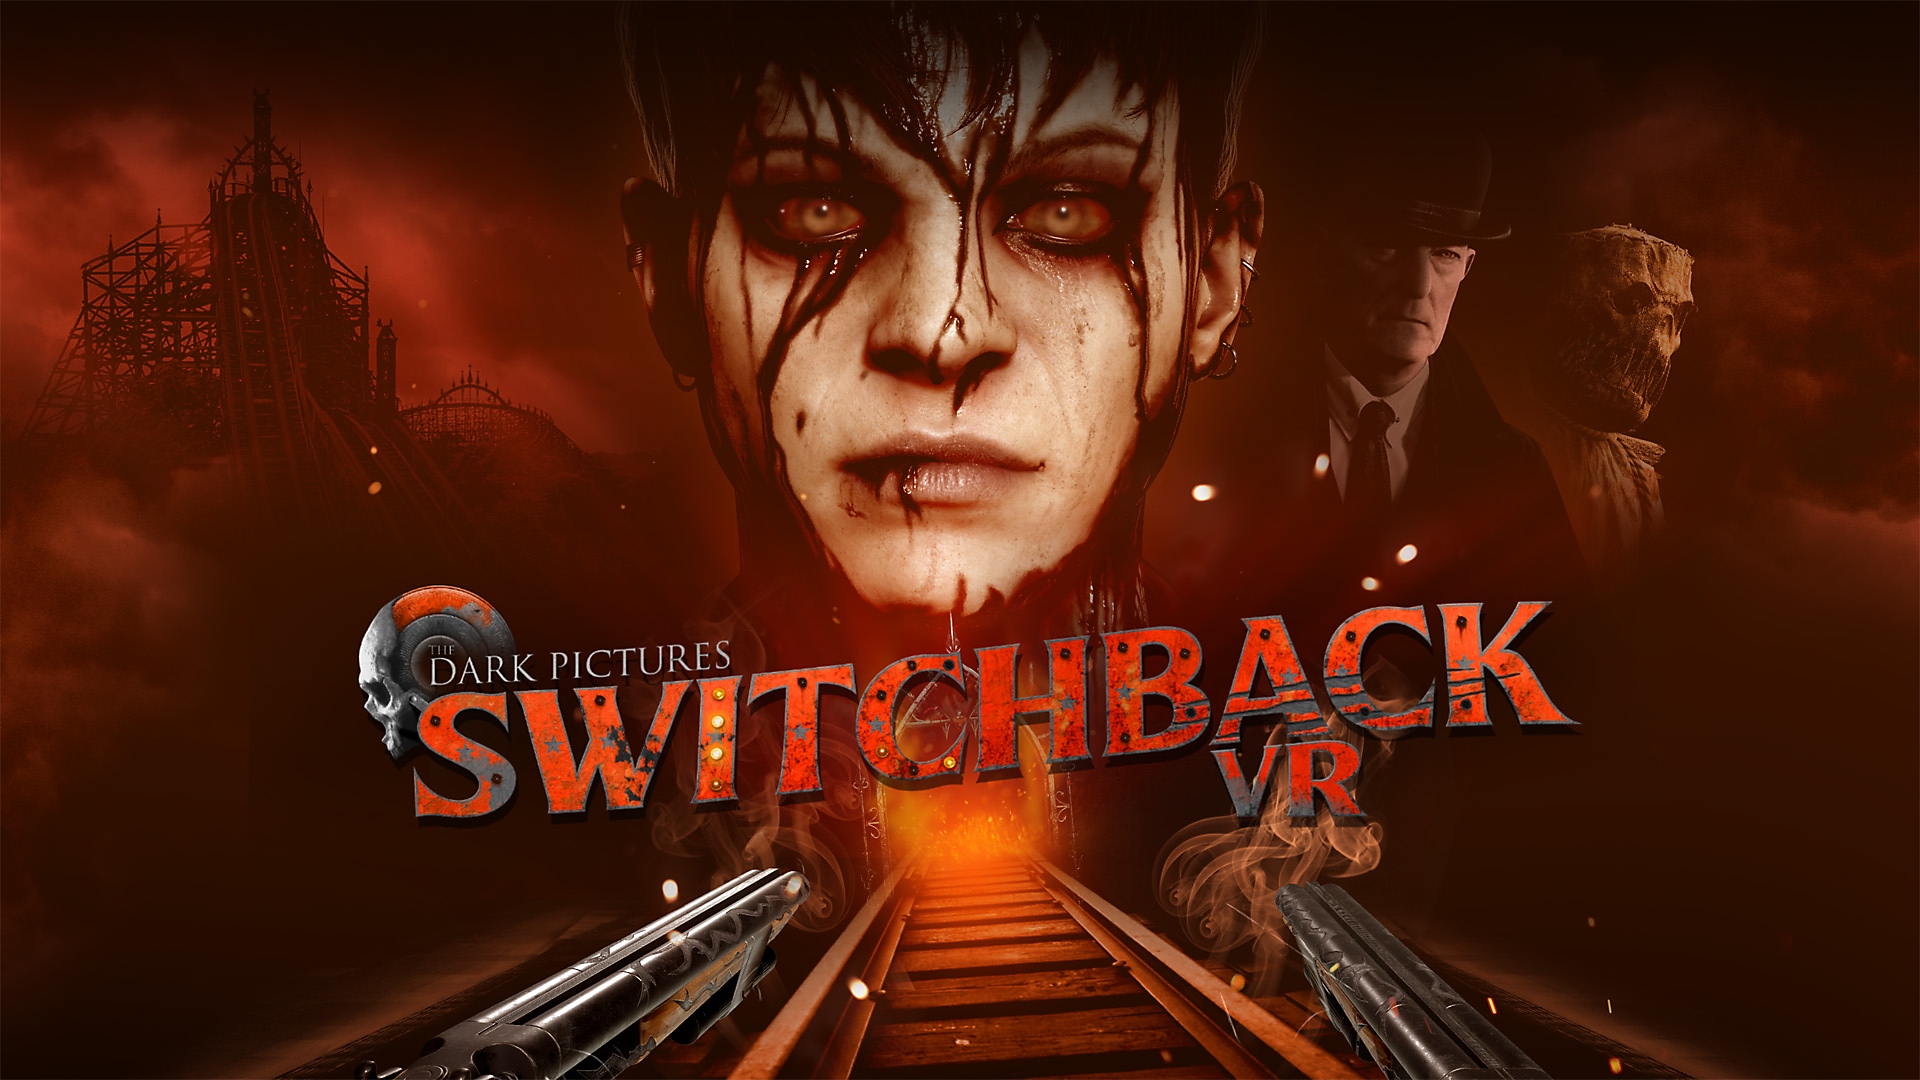 The Dark Pictures: Switchback VR - Announce Trailer | PS VR2 Games